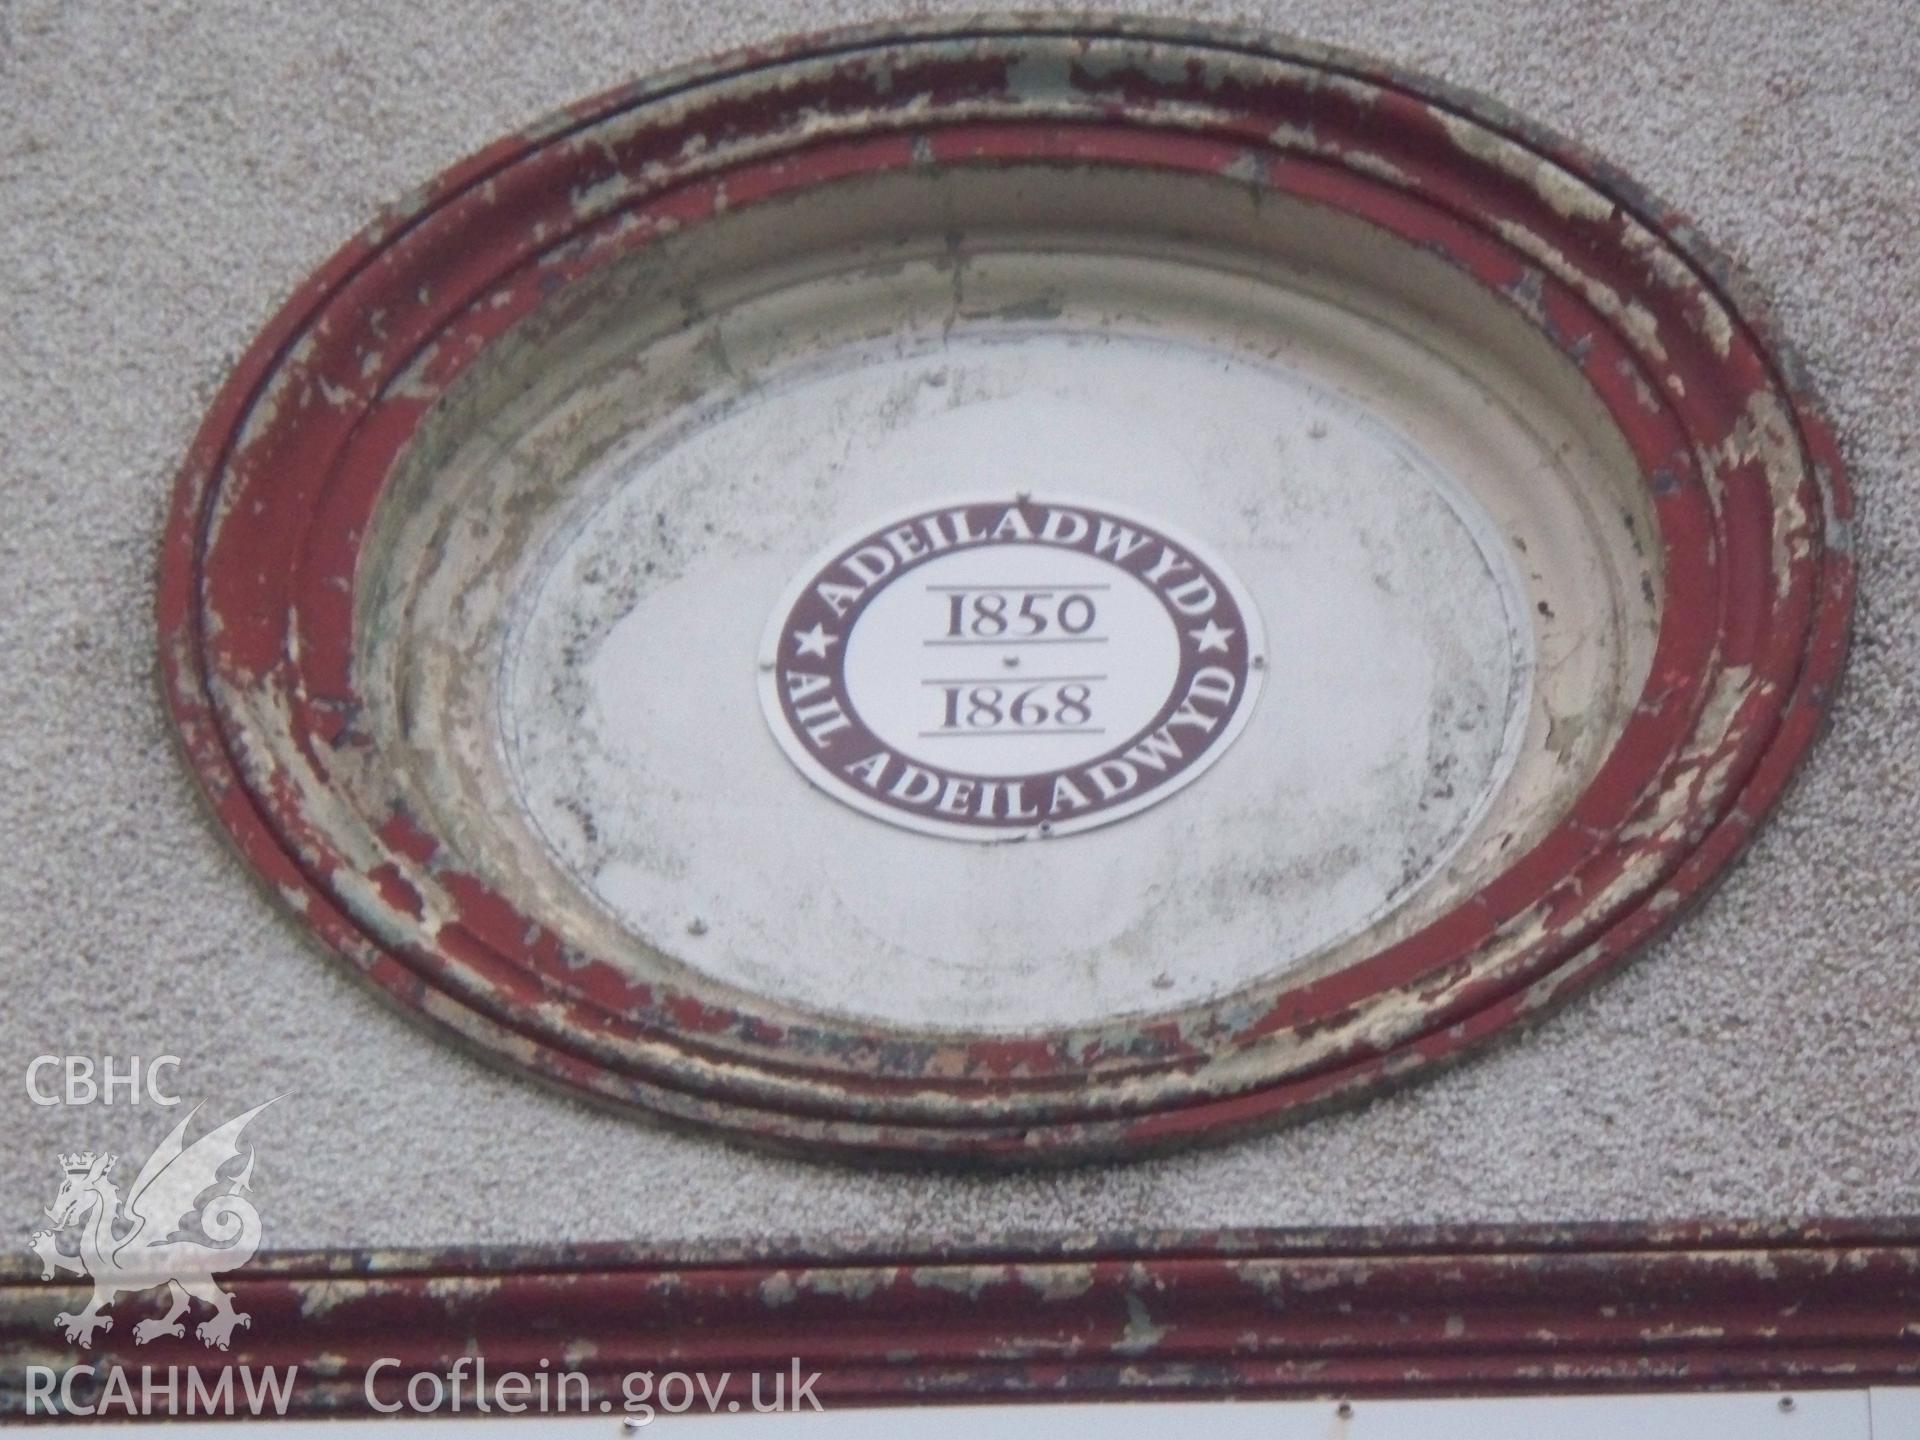 Roundel in gable with built 1850, rebuilt 1868 printed on plastic (in Welsh).